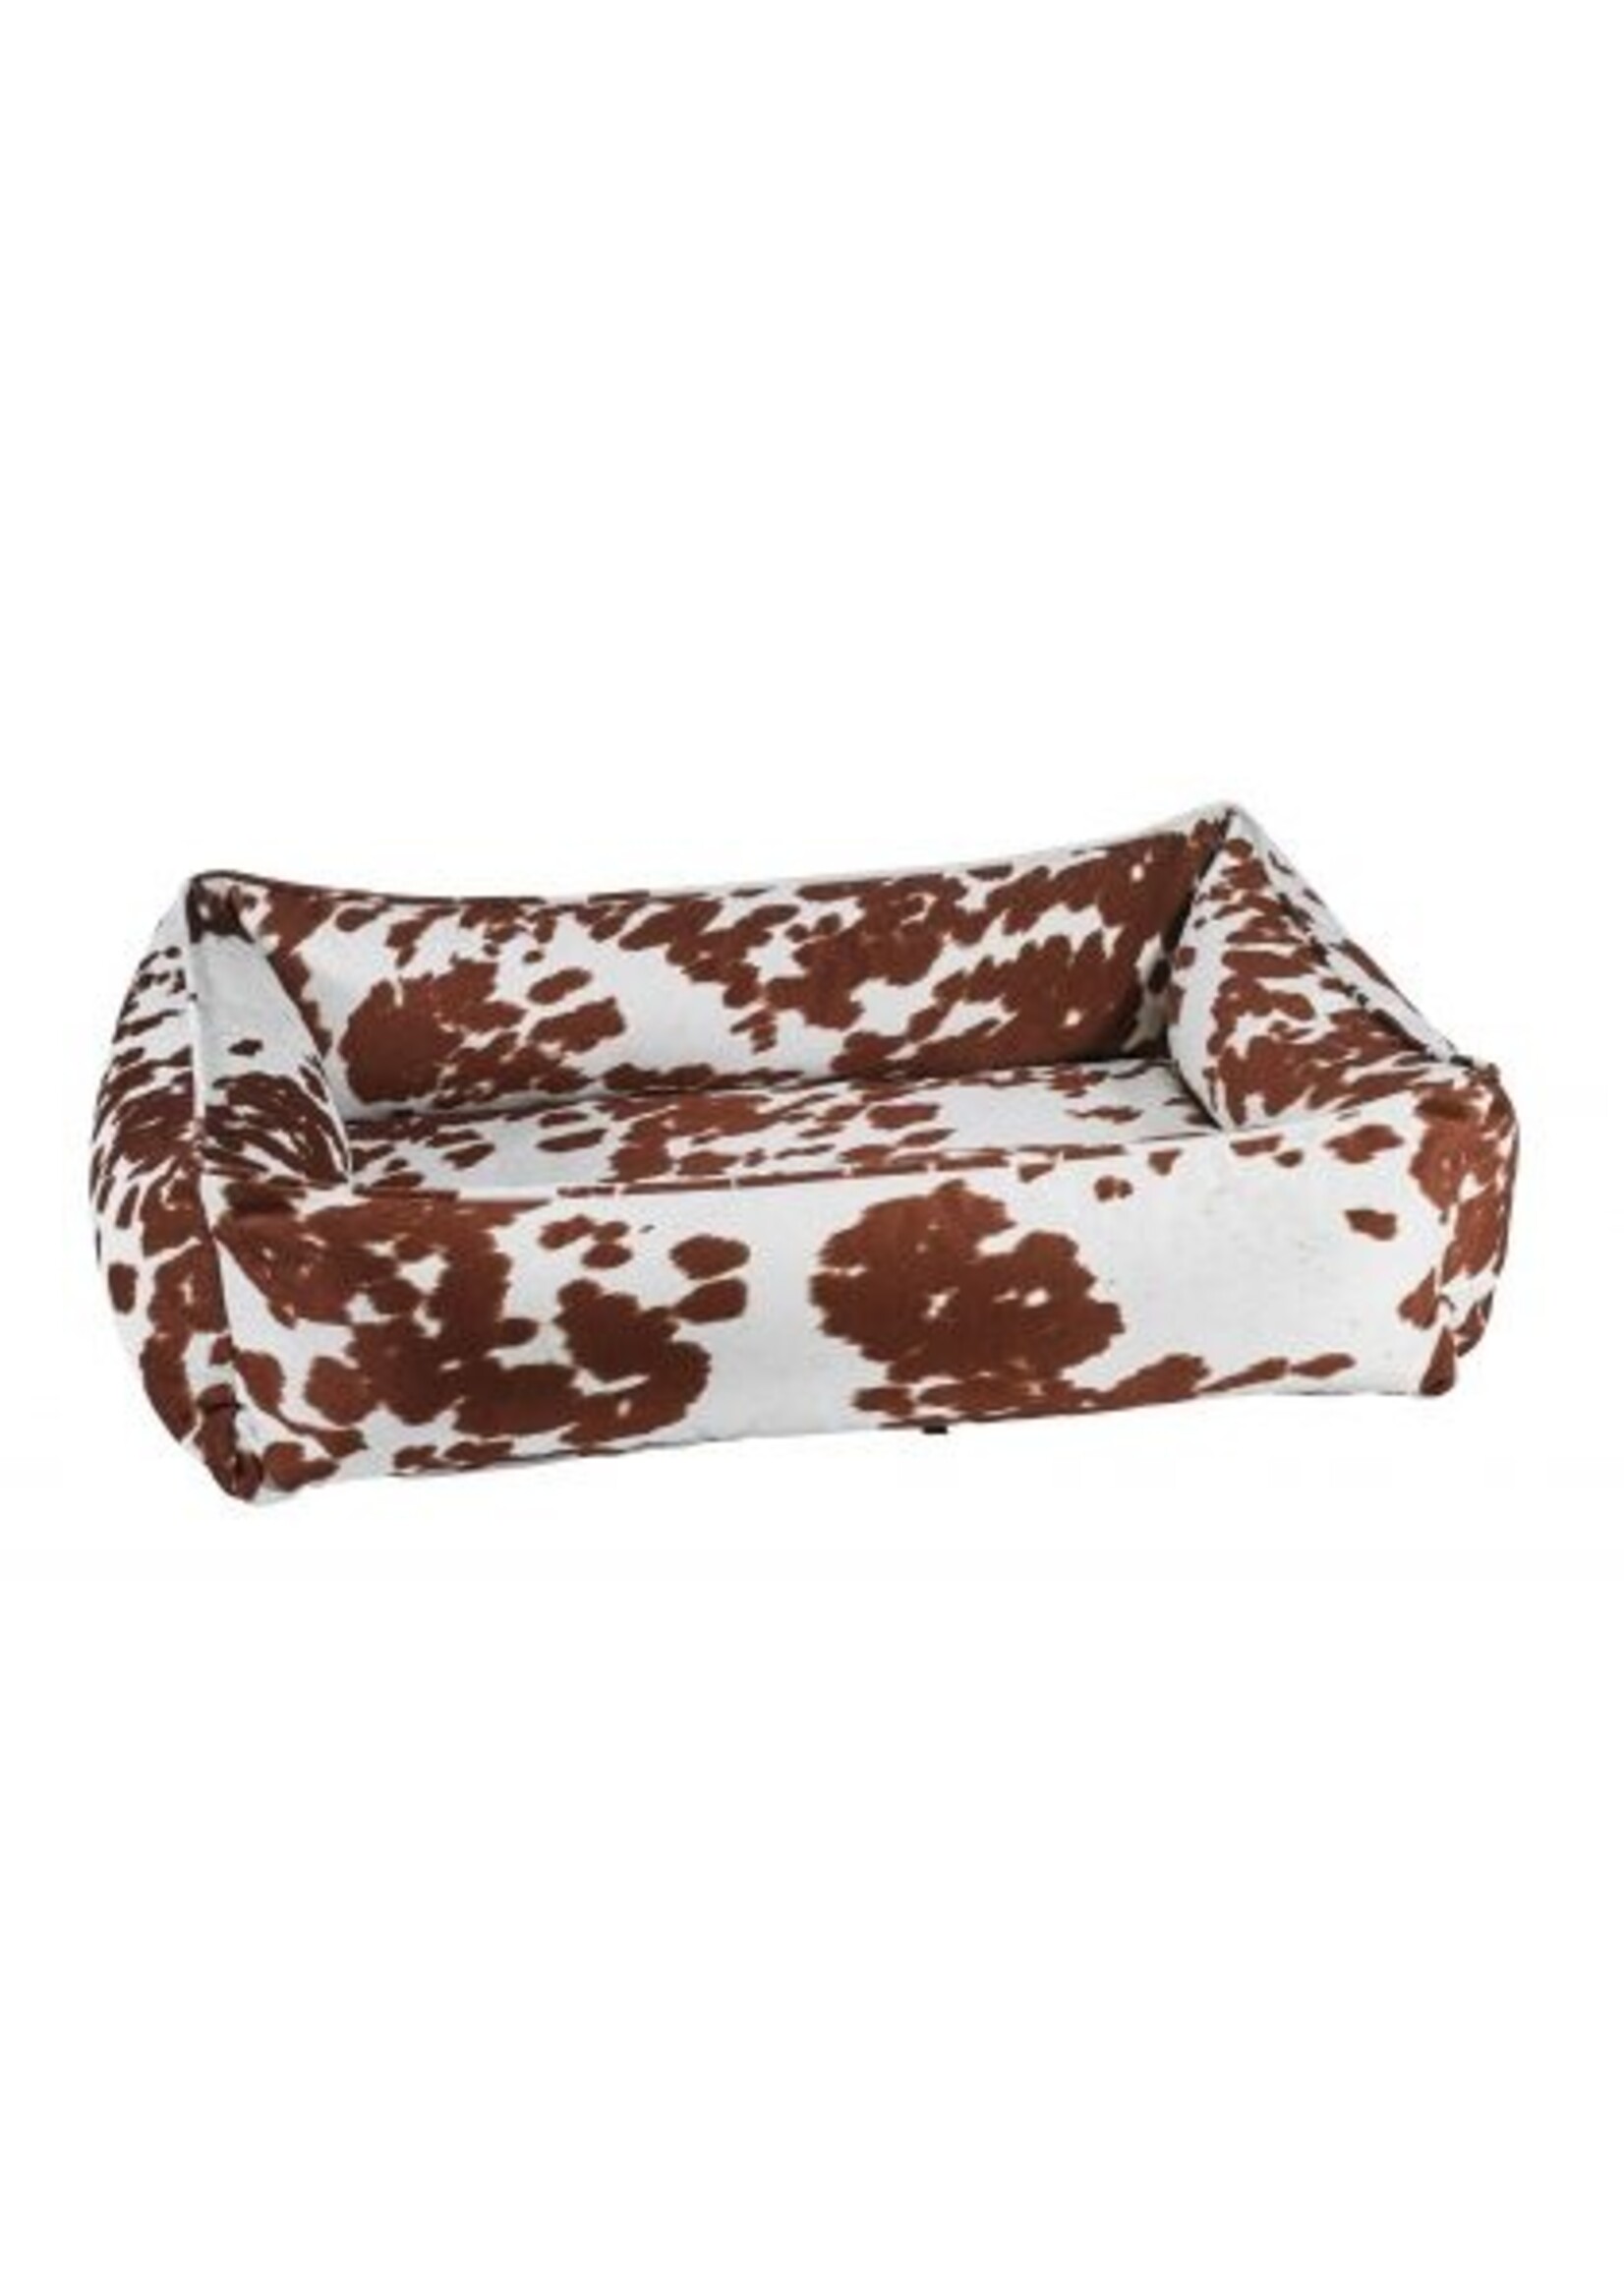 Bowsers Pet Products Bowsers Pet Urban Lounger Microvelvet